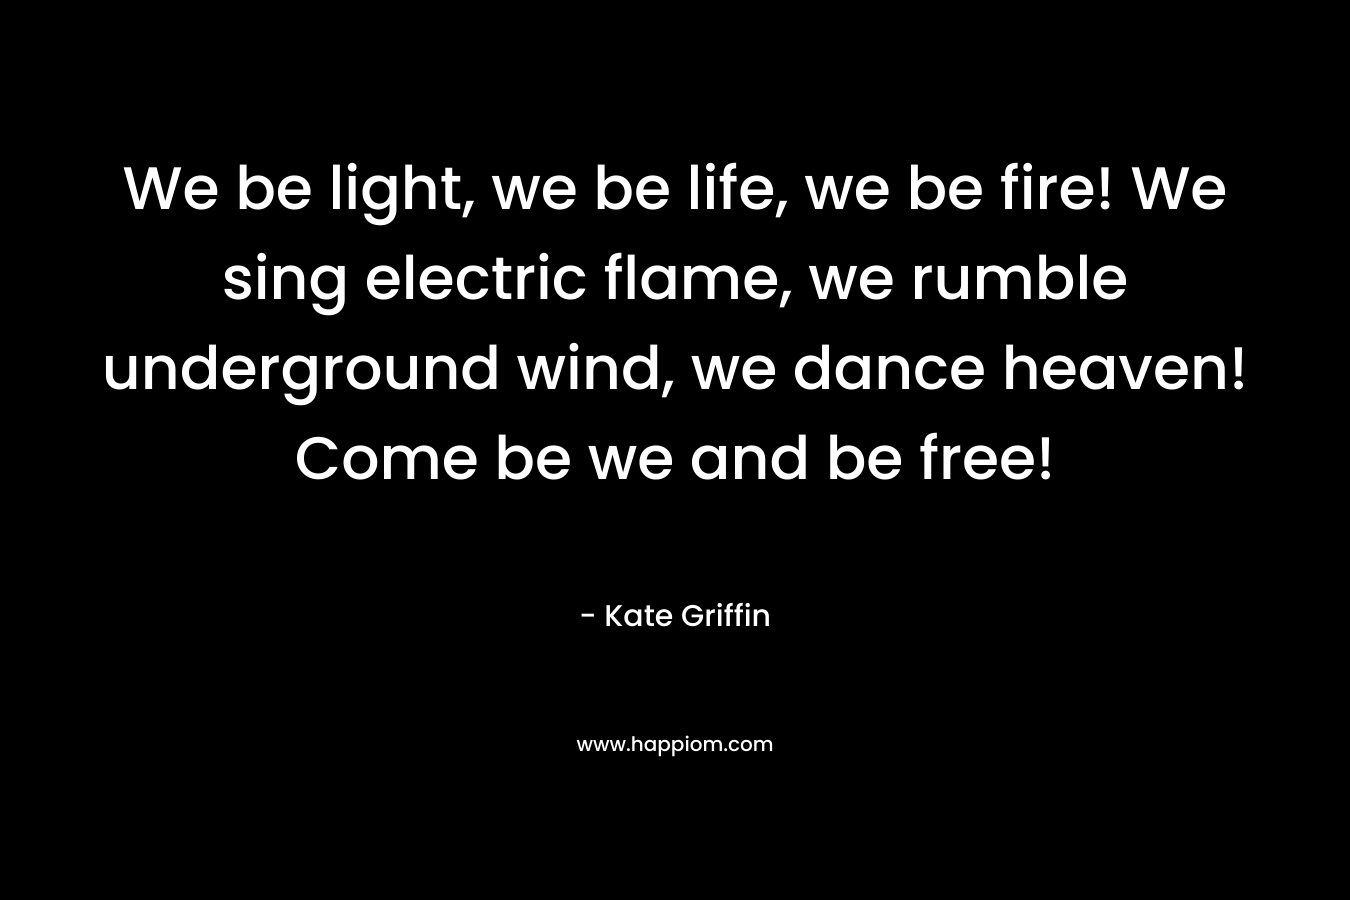 We be light, we be life, we be fire! We sing electric flame, we rumble underground wind, we dance heaven! Come be we and be free!